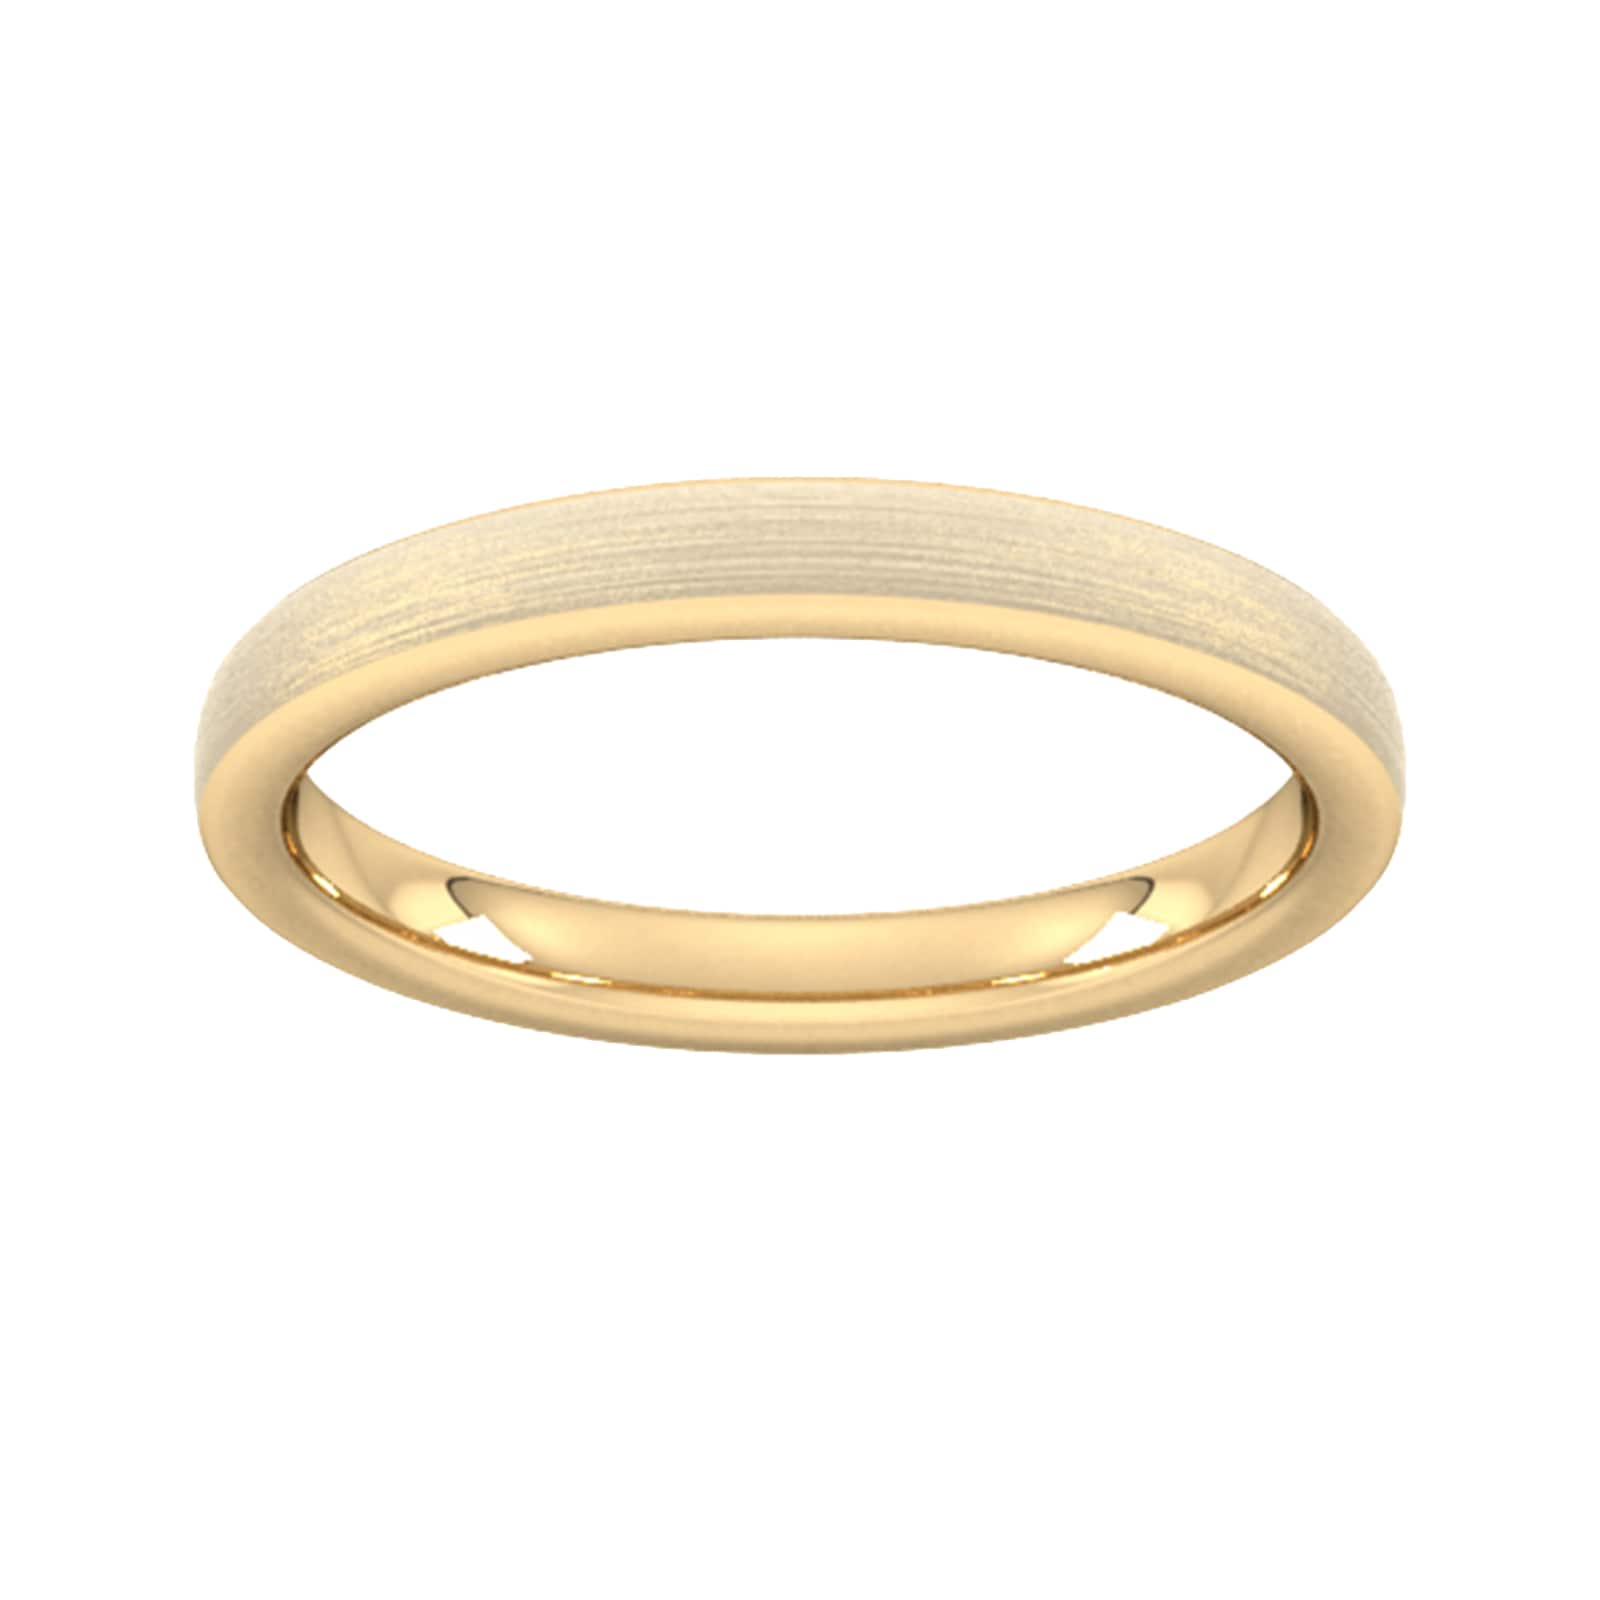 2.5mm Slight Court Extra Heavy Polished Chamfered Edges With Matt Centre Wedding Ring In 18 Carat Yellow Gold - Ring Size L